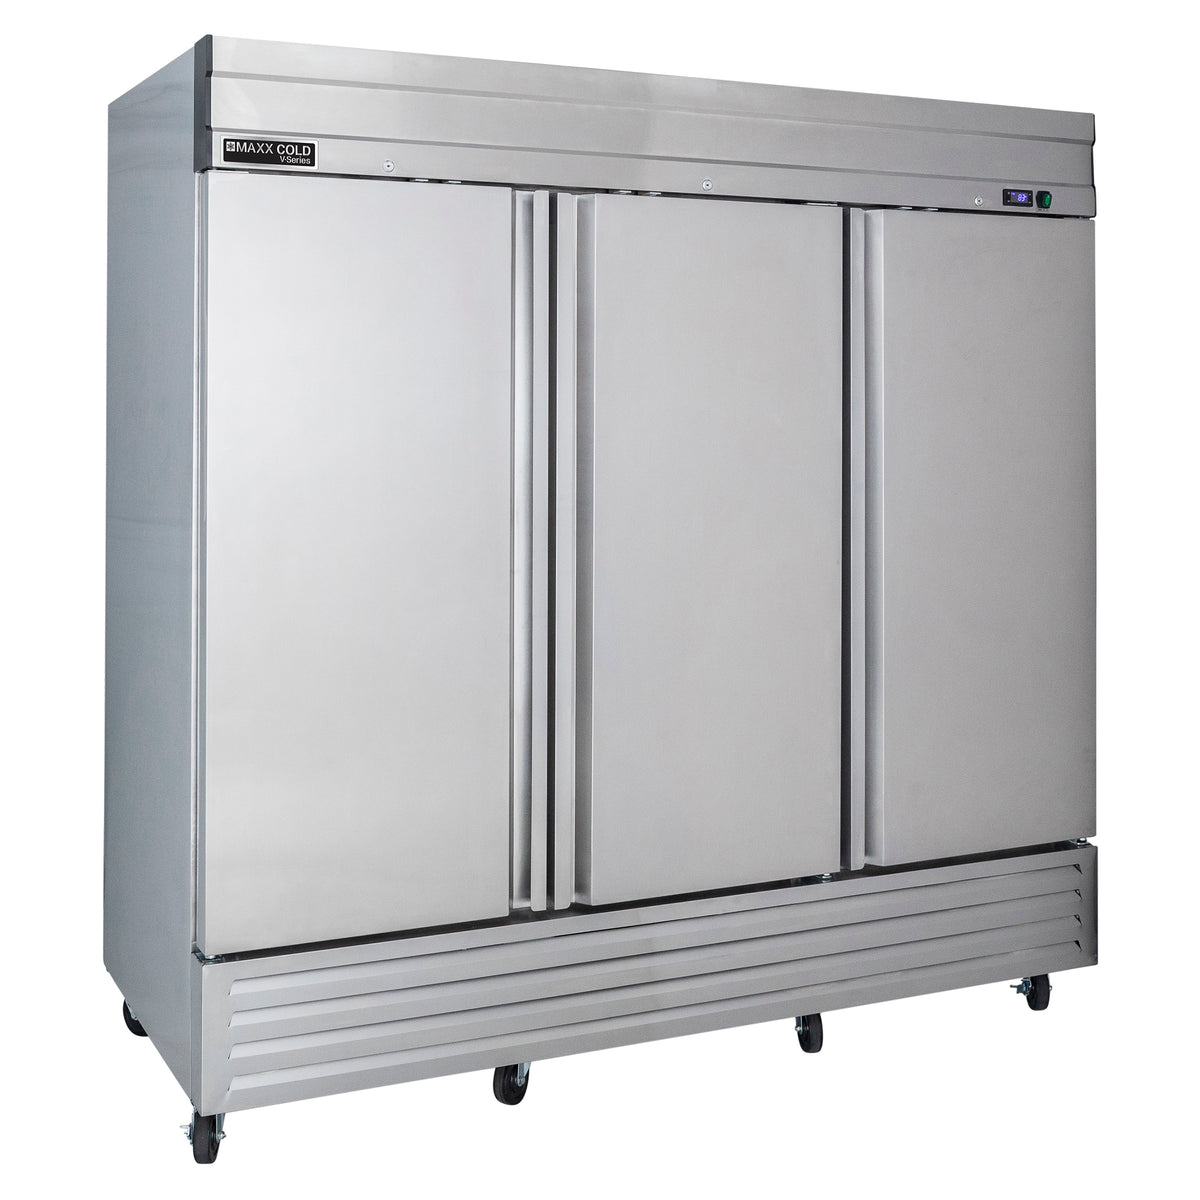 Maxx Cold MVR-72FD V-Series 3 Solid Door Reach-In Refrigerator, Bottom Mount, 81"W, 65 cu. ft. Storage Capacity, in Stainless Steel (MVR-72FDHC)